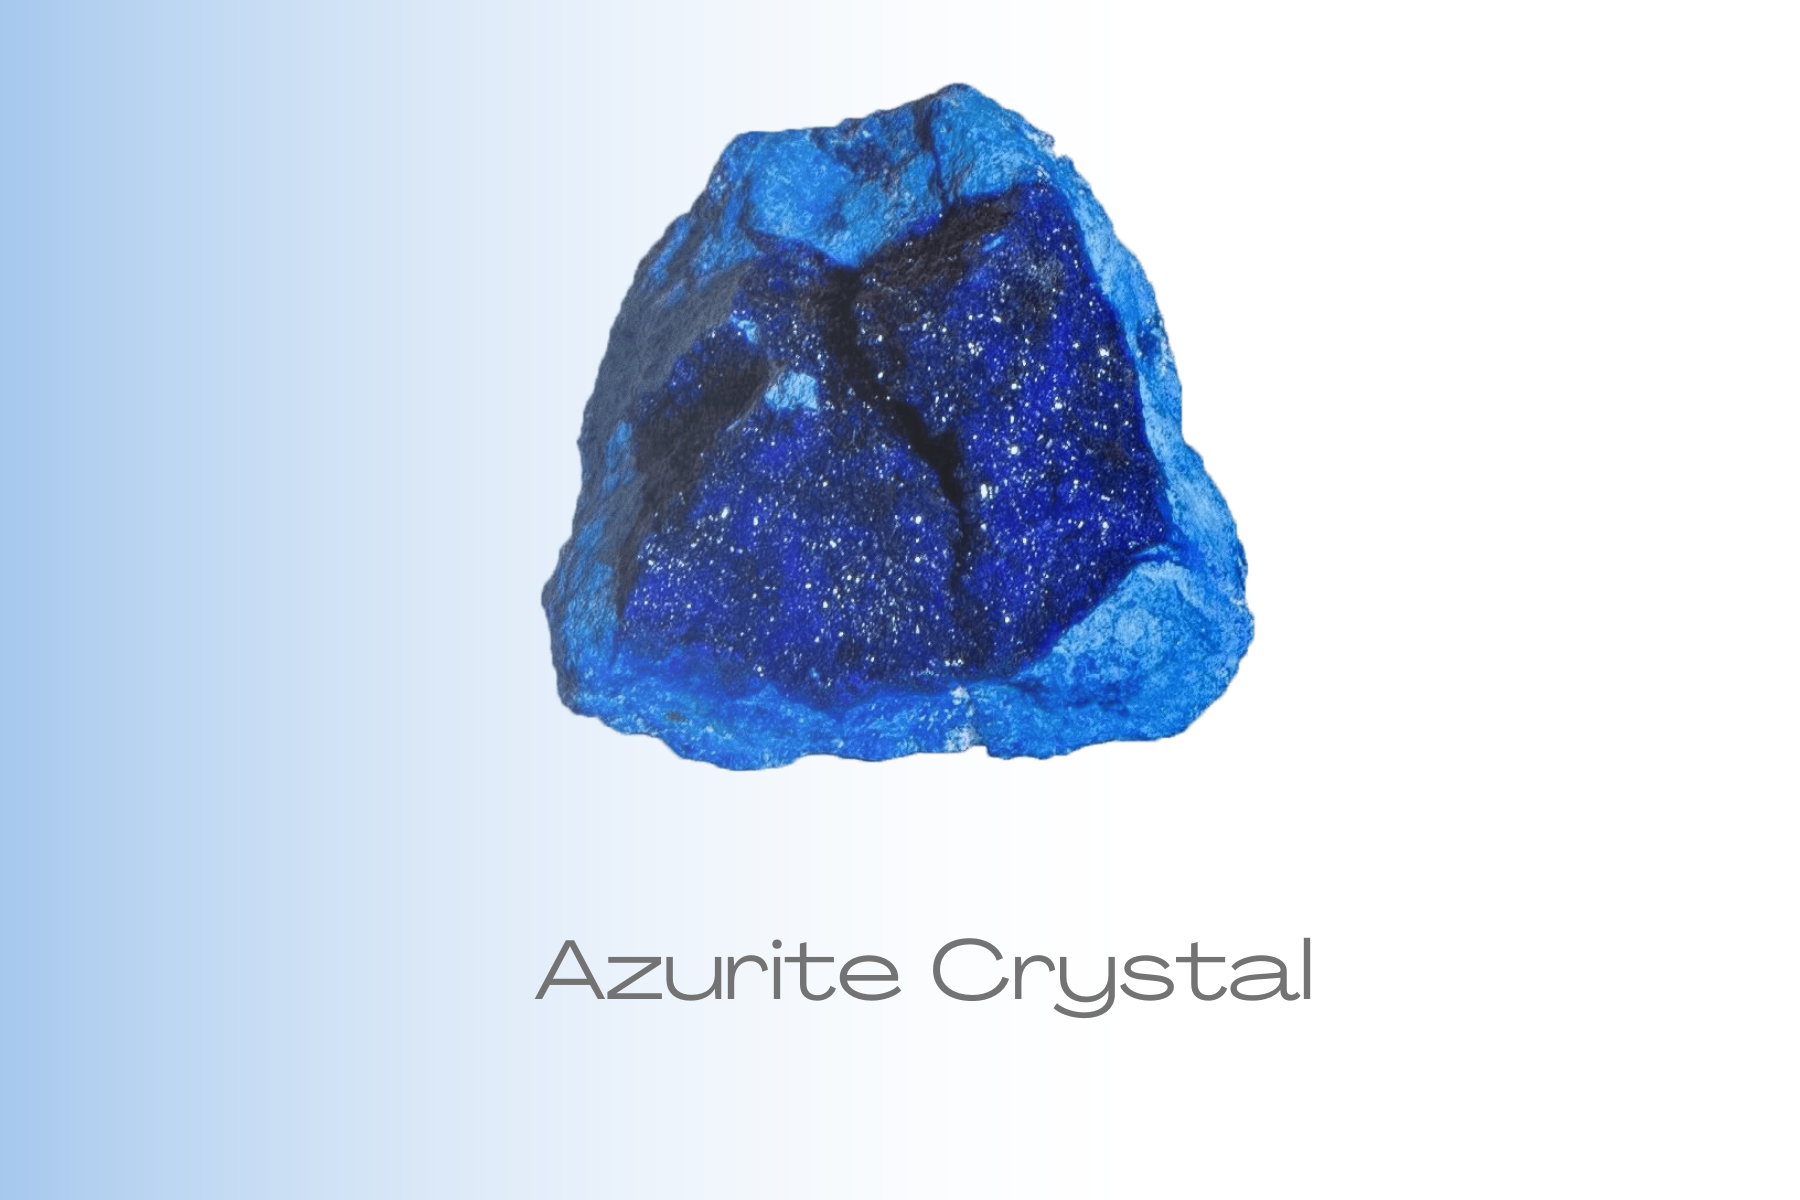 A rock-formed Azurite crystal